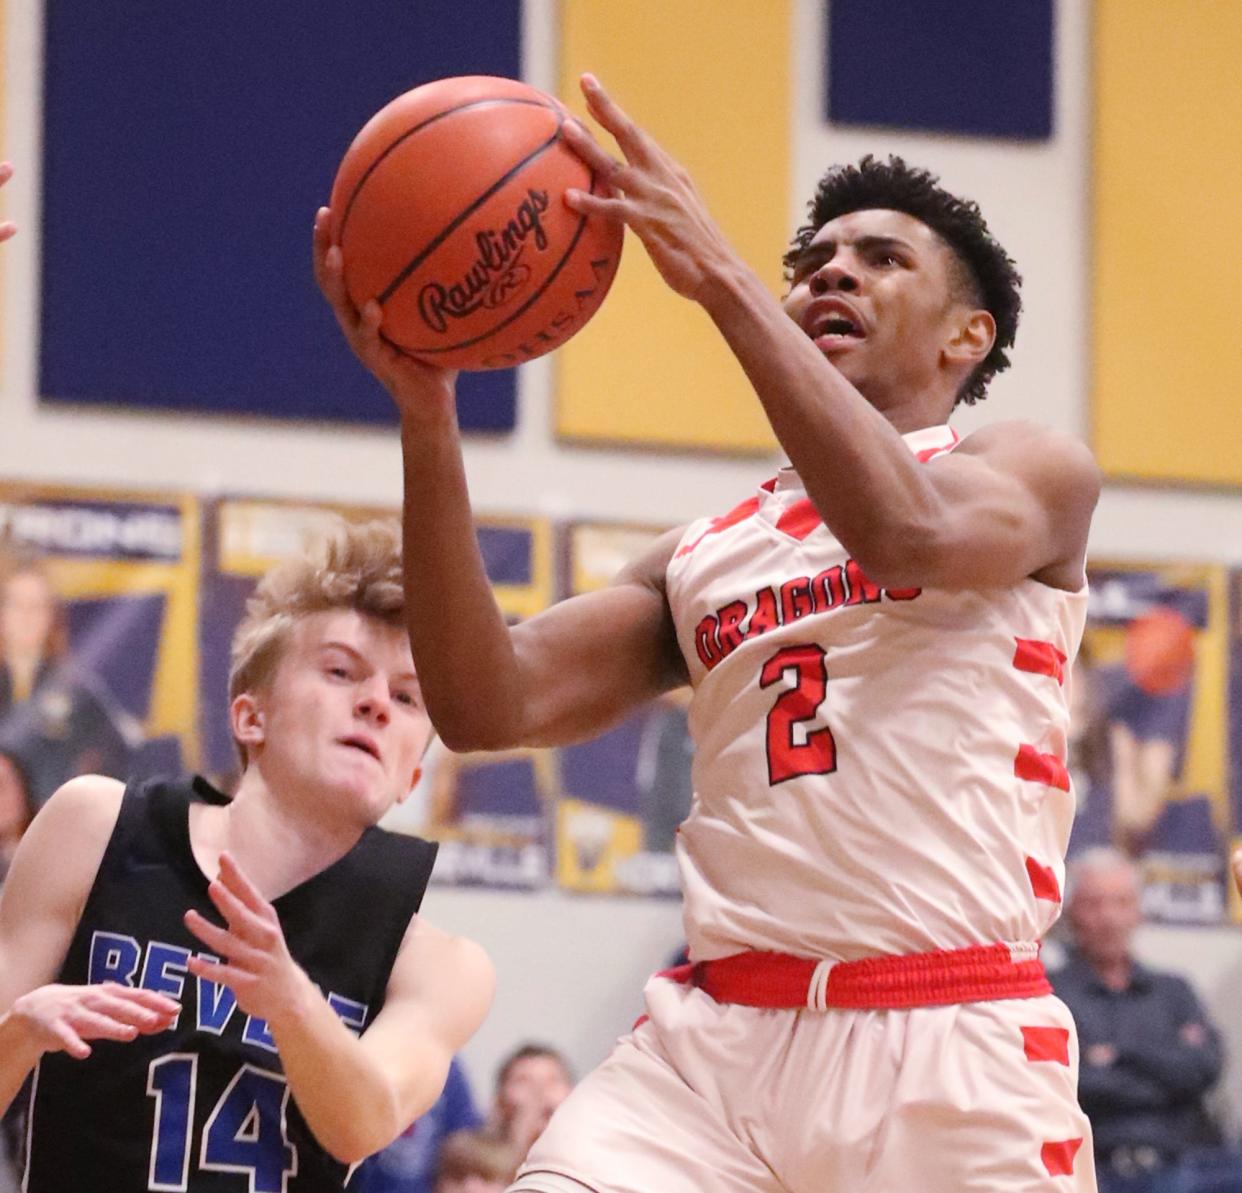 East's Mike Woodall gets to the basket as Revere's Baron Bania looks on during the Div. II district semifinal boys basketball game at North Ridgeville Academic Center on Thursday.